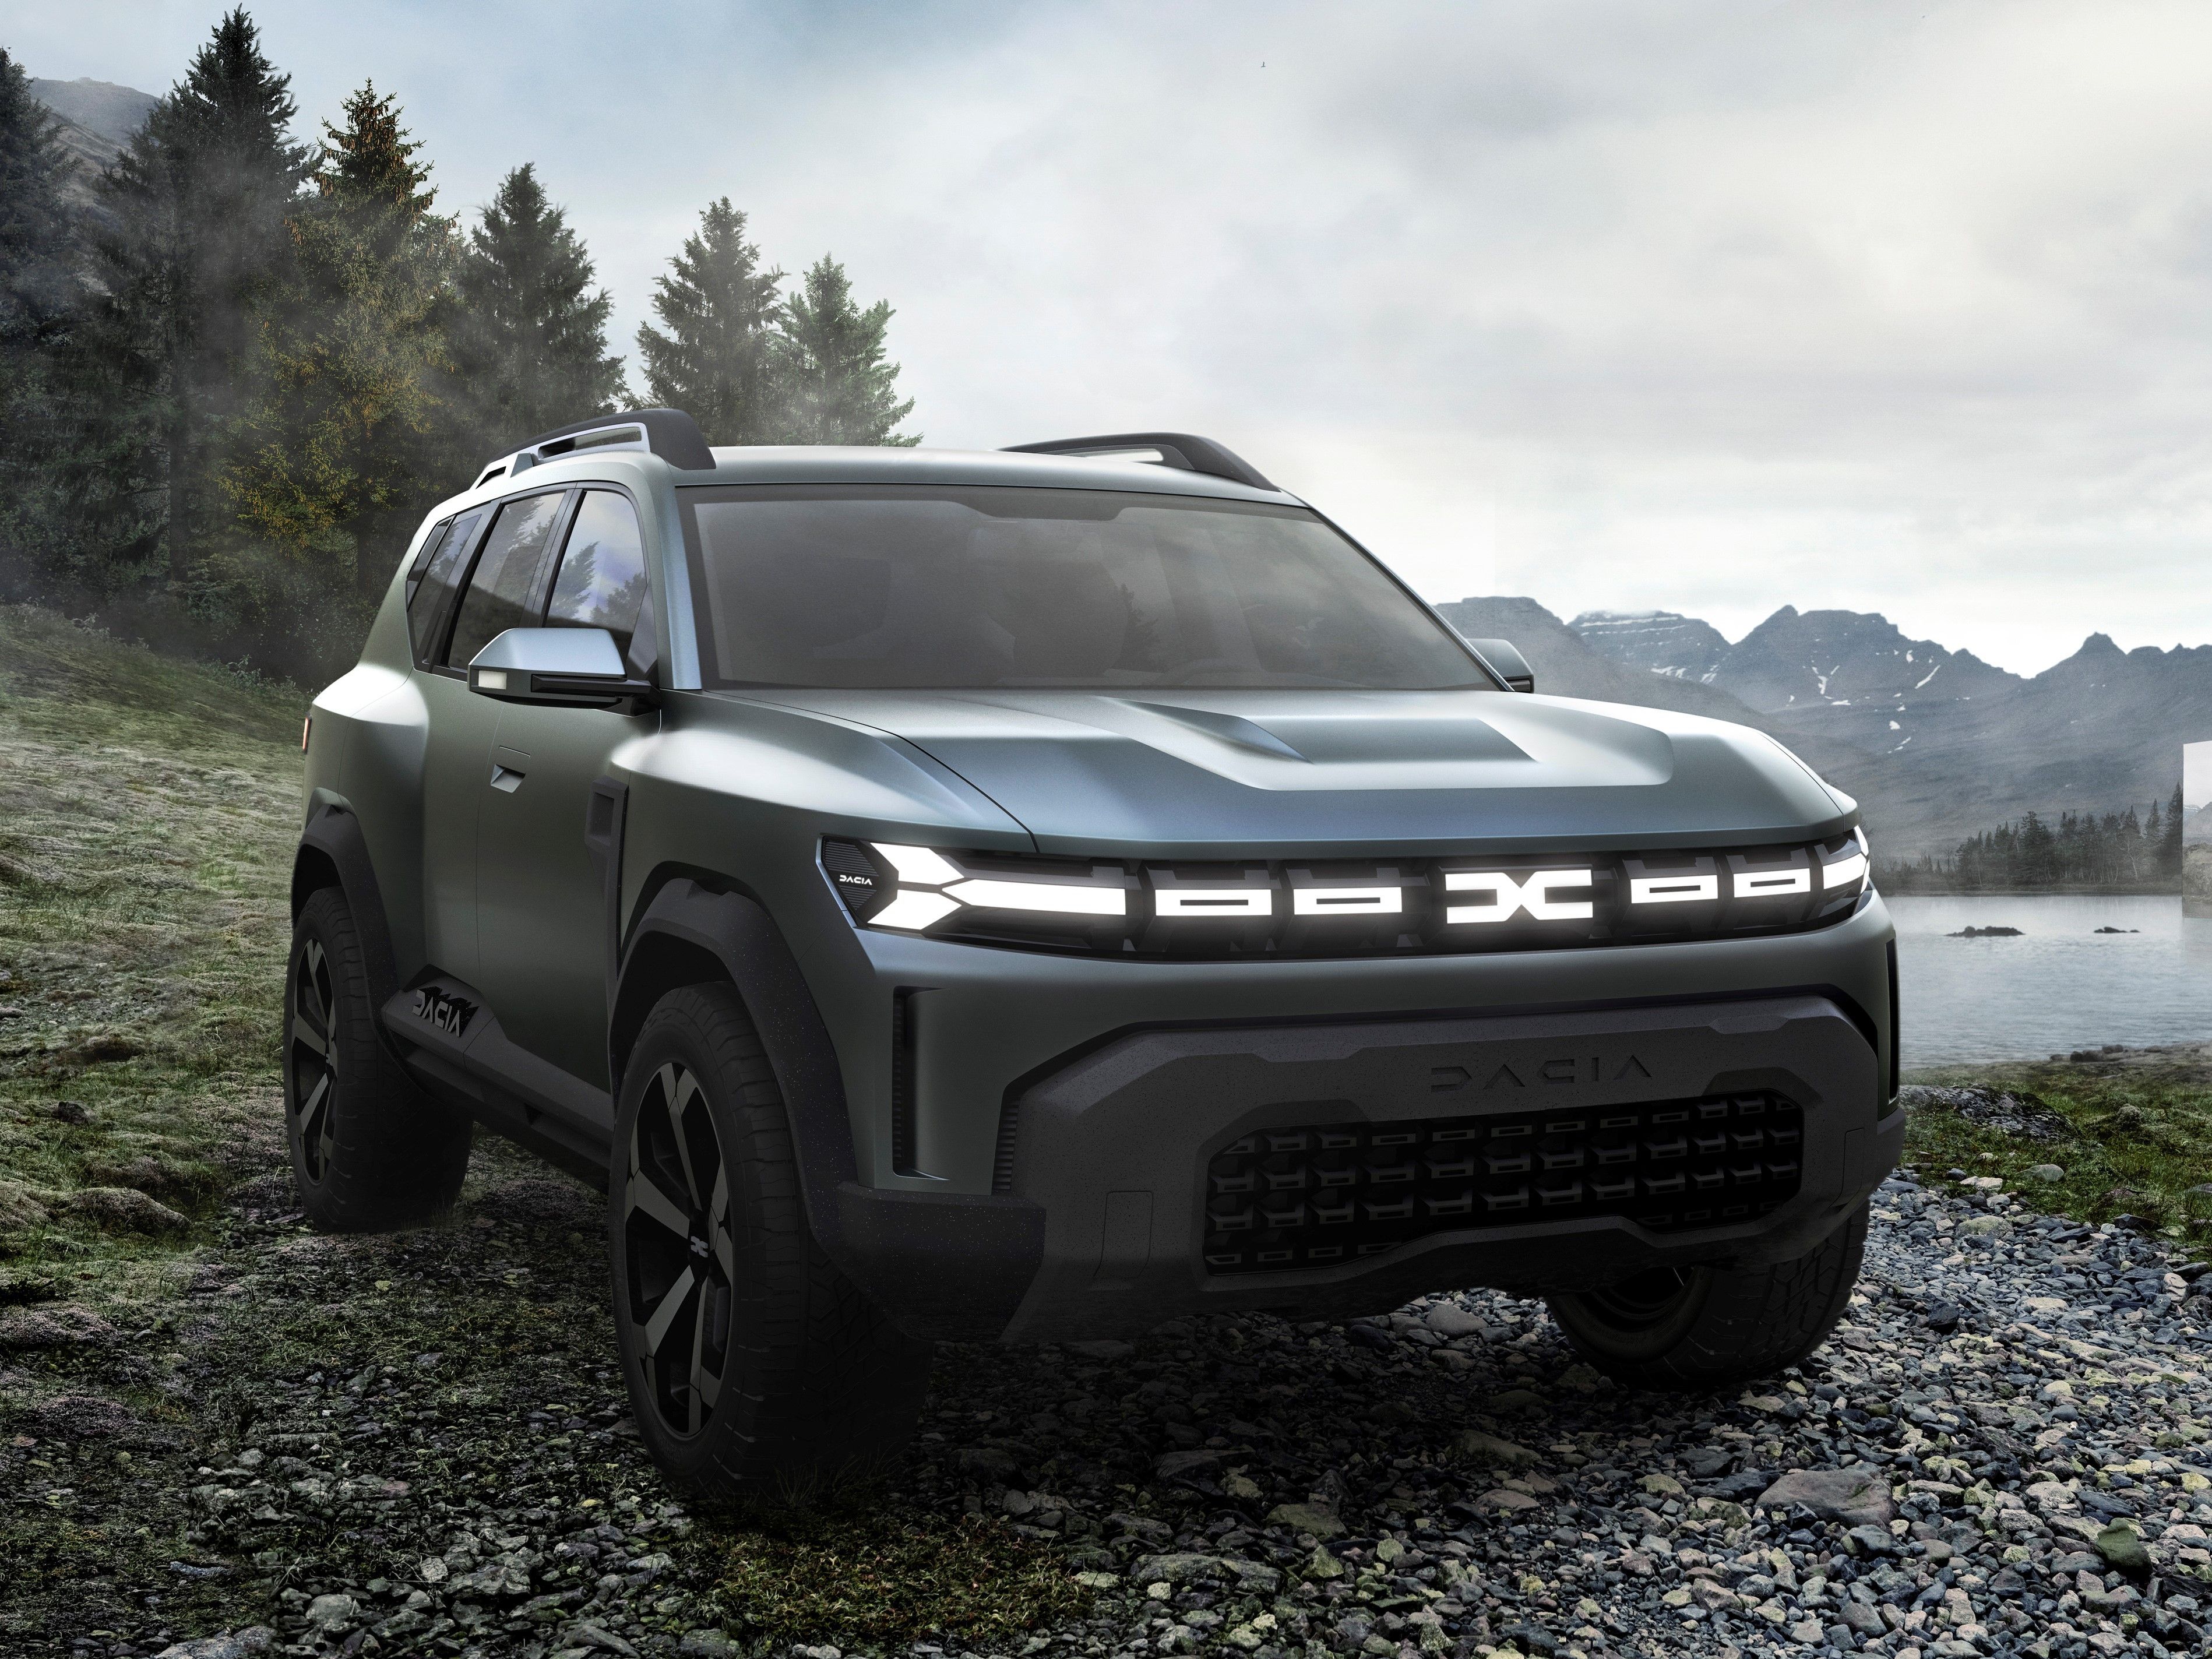 Renault Bigster Concept Unveiled, Could Preview New India-bound SUV ...